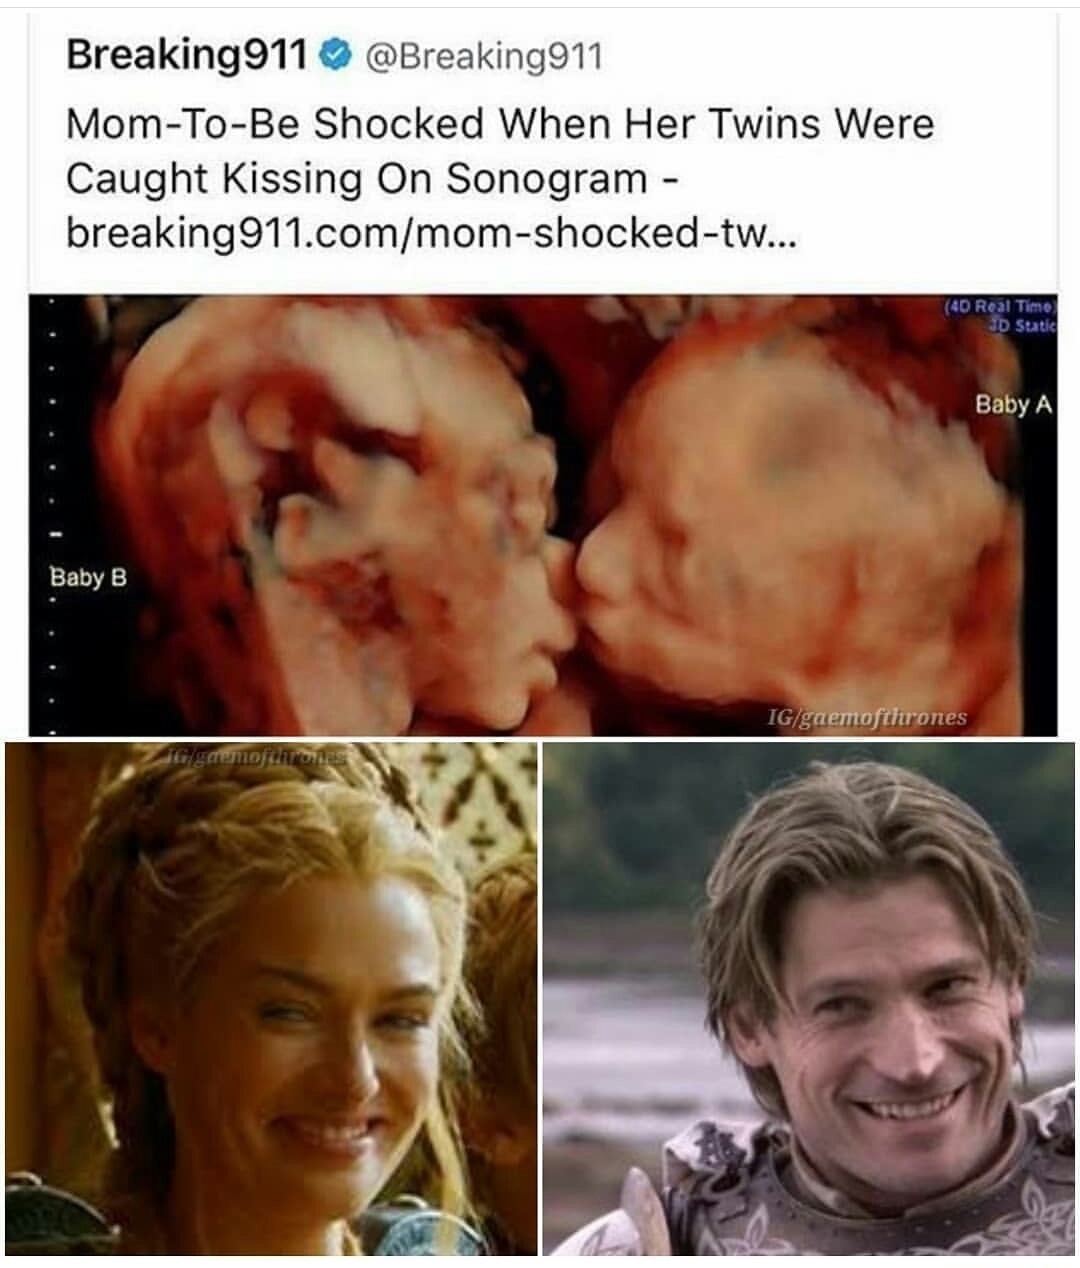 meme stream - sweet home alabama meme - Breaking 911 MomToBe Shocked When Her Twins Were Caught Kissing On Sonogram breaking911.commomshockedtw... 40 Real Timo Id Suatic Baby A Baby B Iggaemofthrones demoftTORES